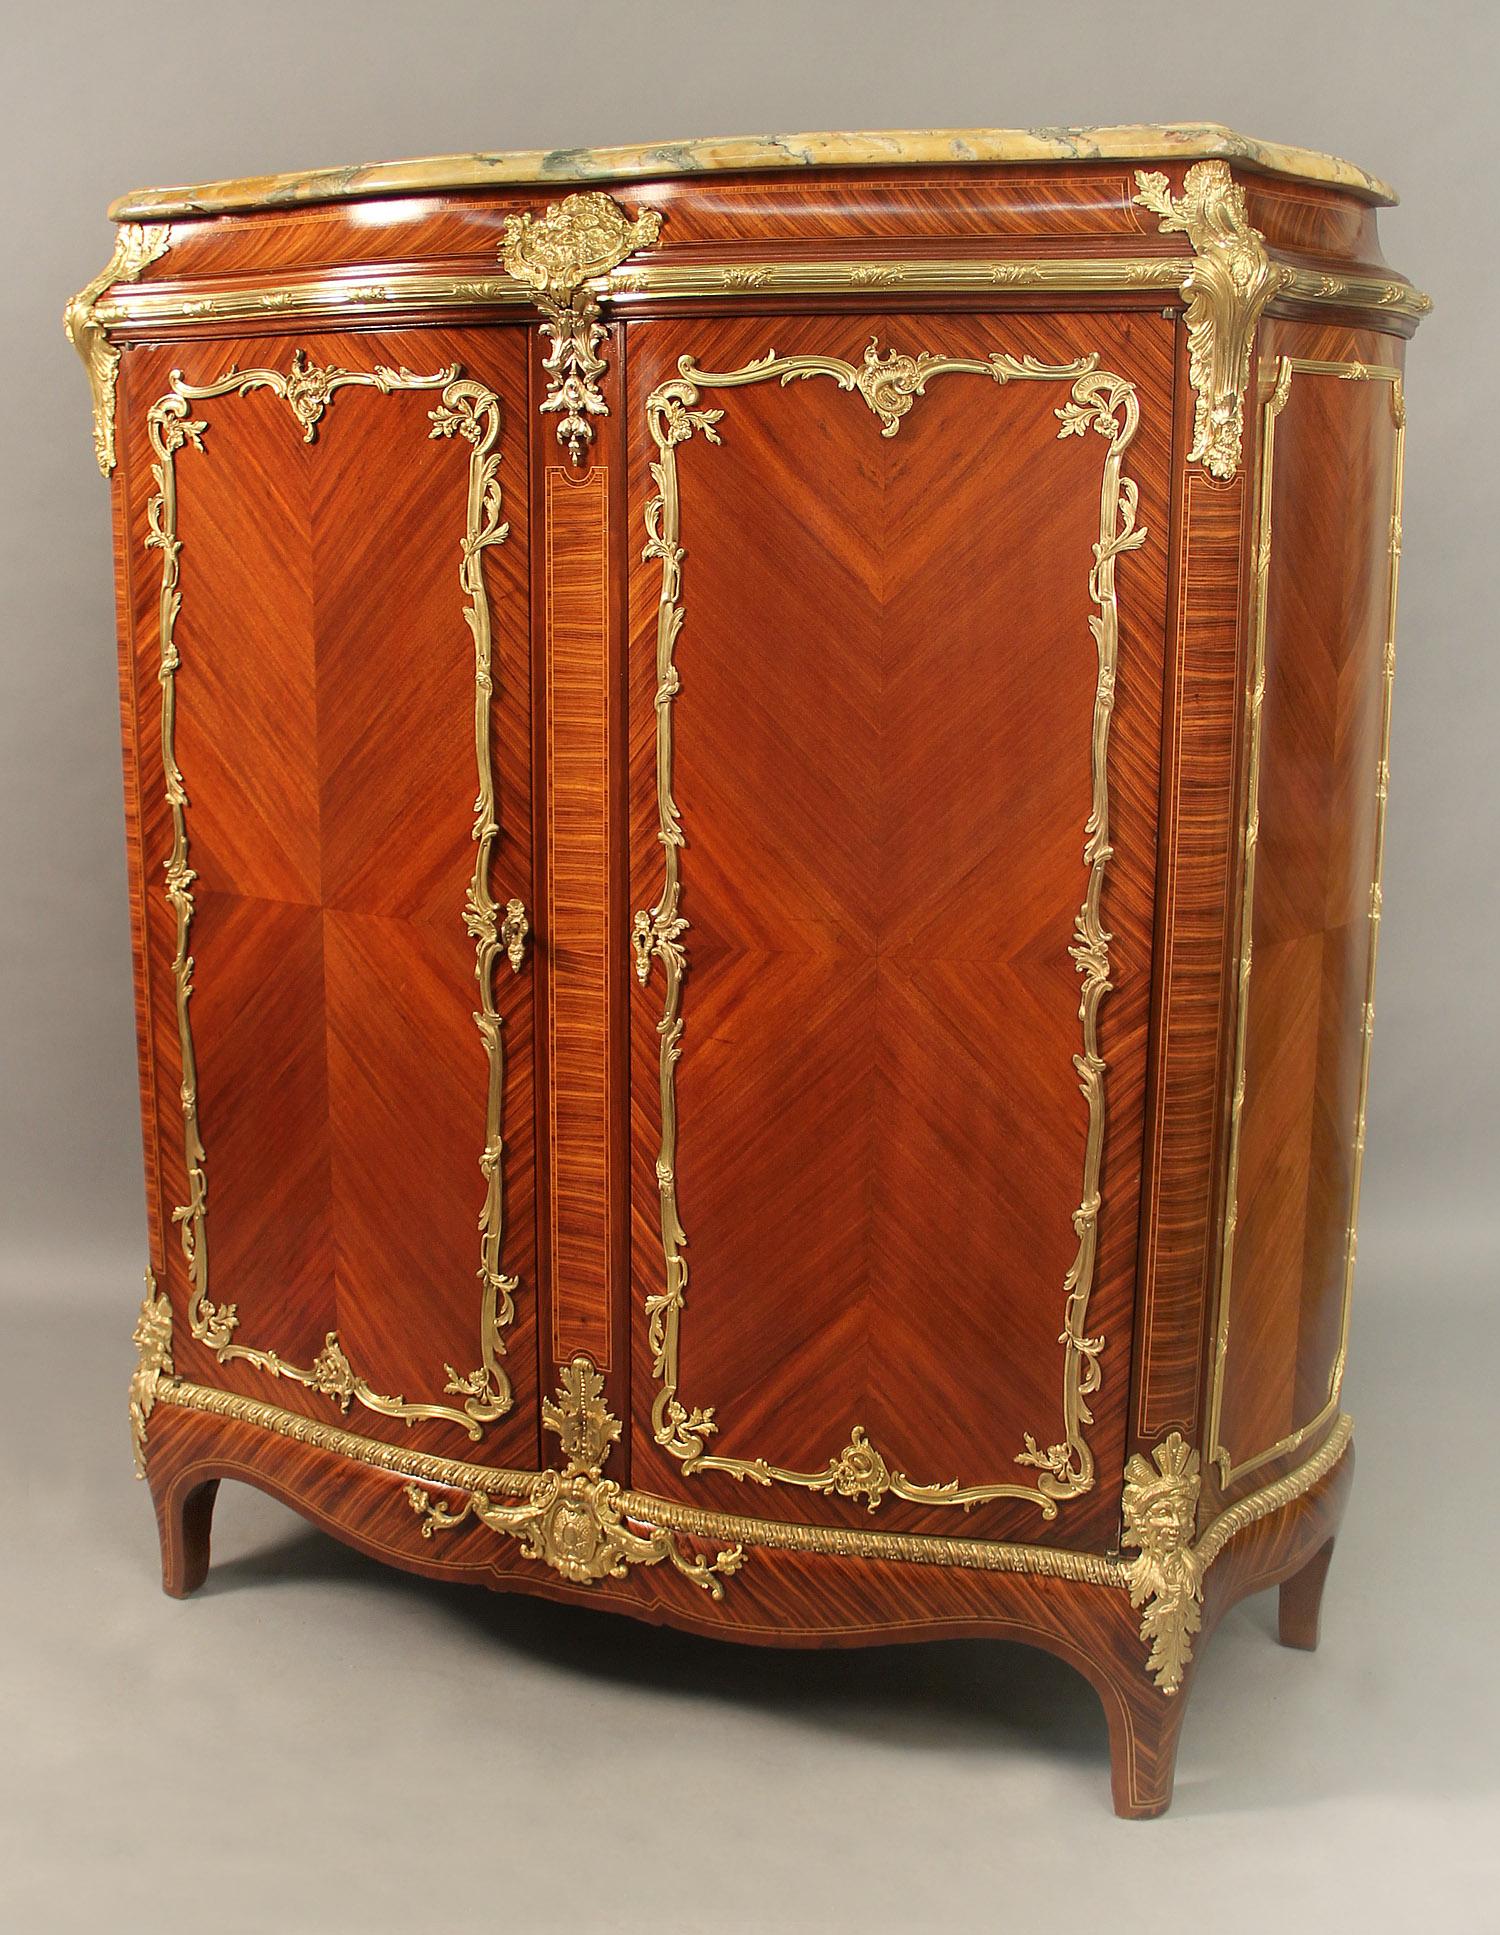 A fine Late 19th century Gilt Bronze Mounted Transitional Style Tall Cabinet By François Linke

François Linke

The marble top above two long doors, the front and sides quarter veneered. The top centered with a gilt bronze mask of Bacchus, the